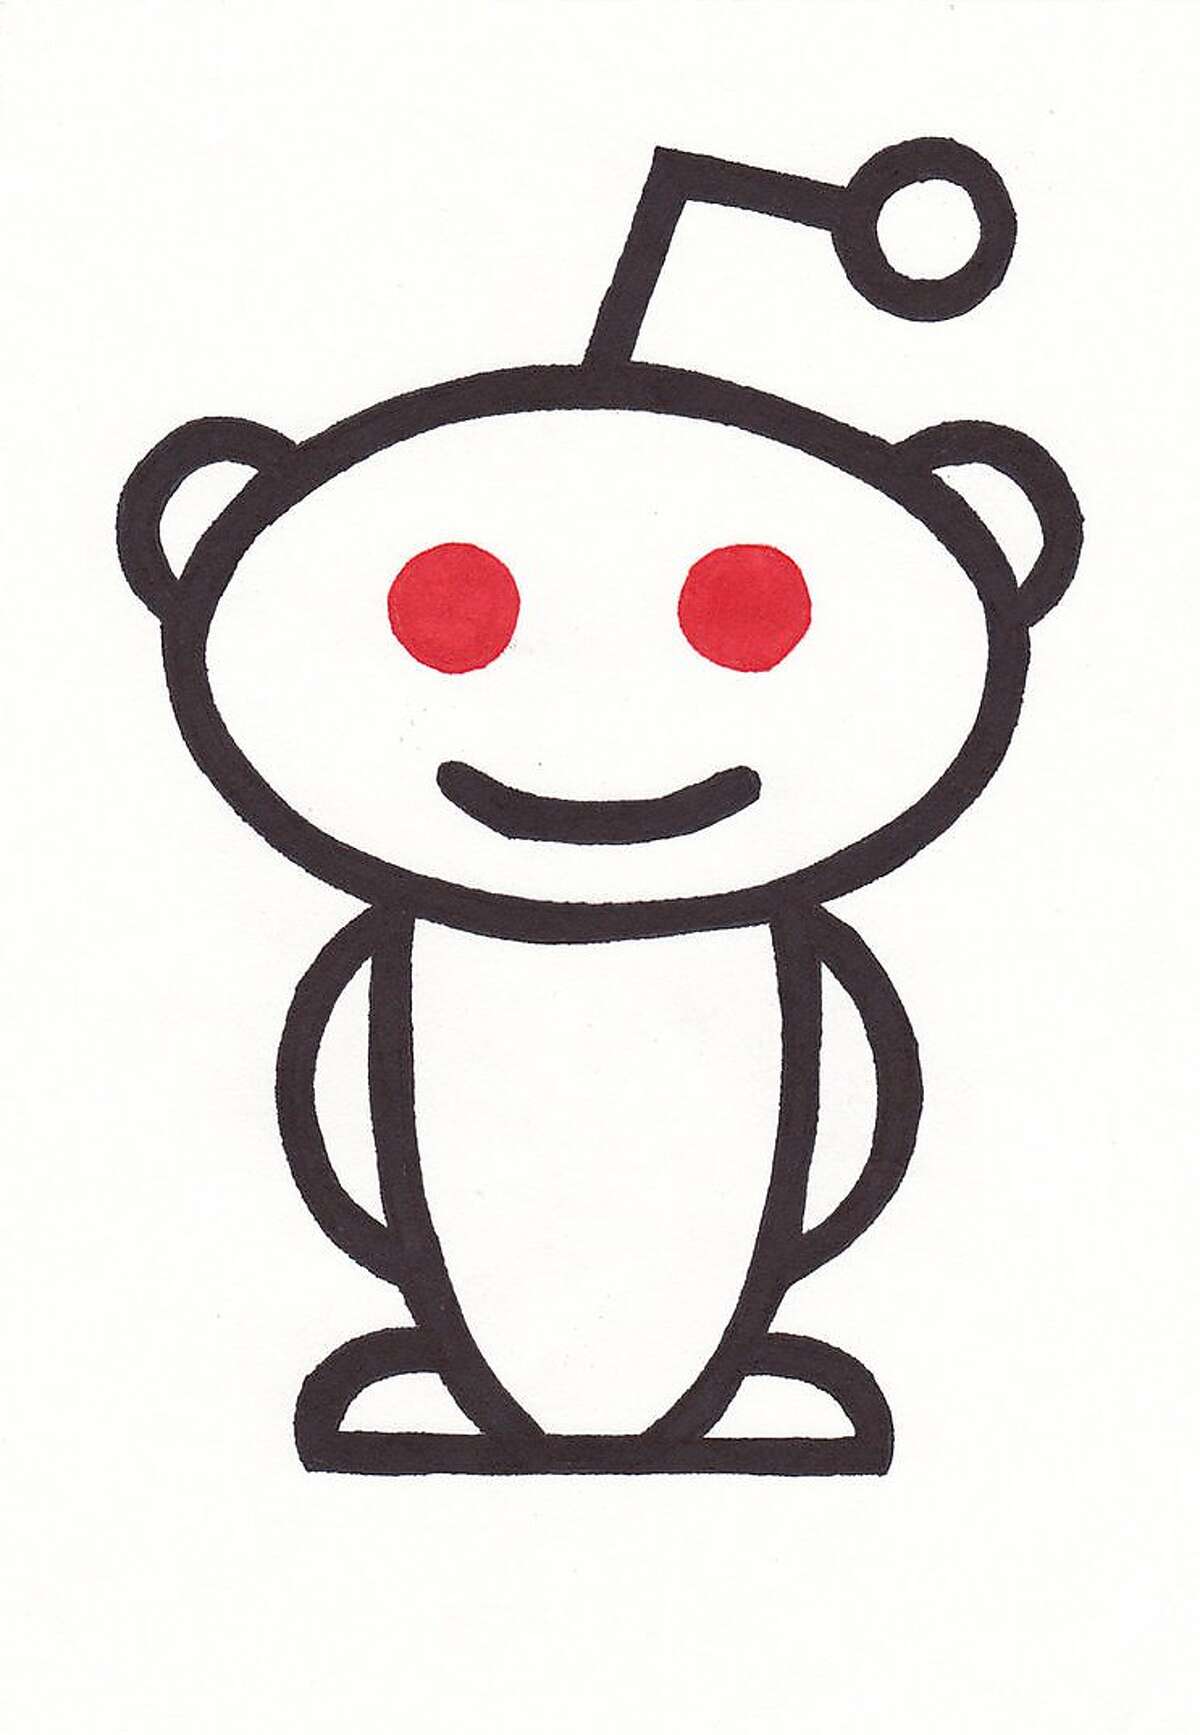 A Redditor can be easily spotted if he or she is sporting the Reddit logo on their car or clothing.